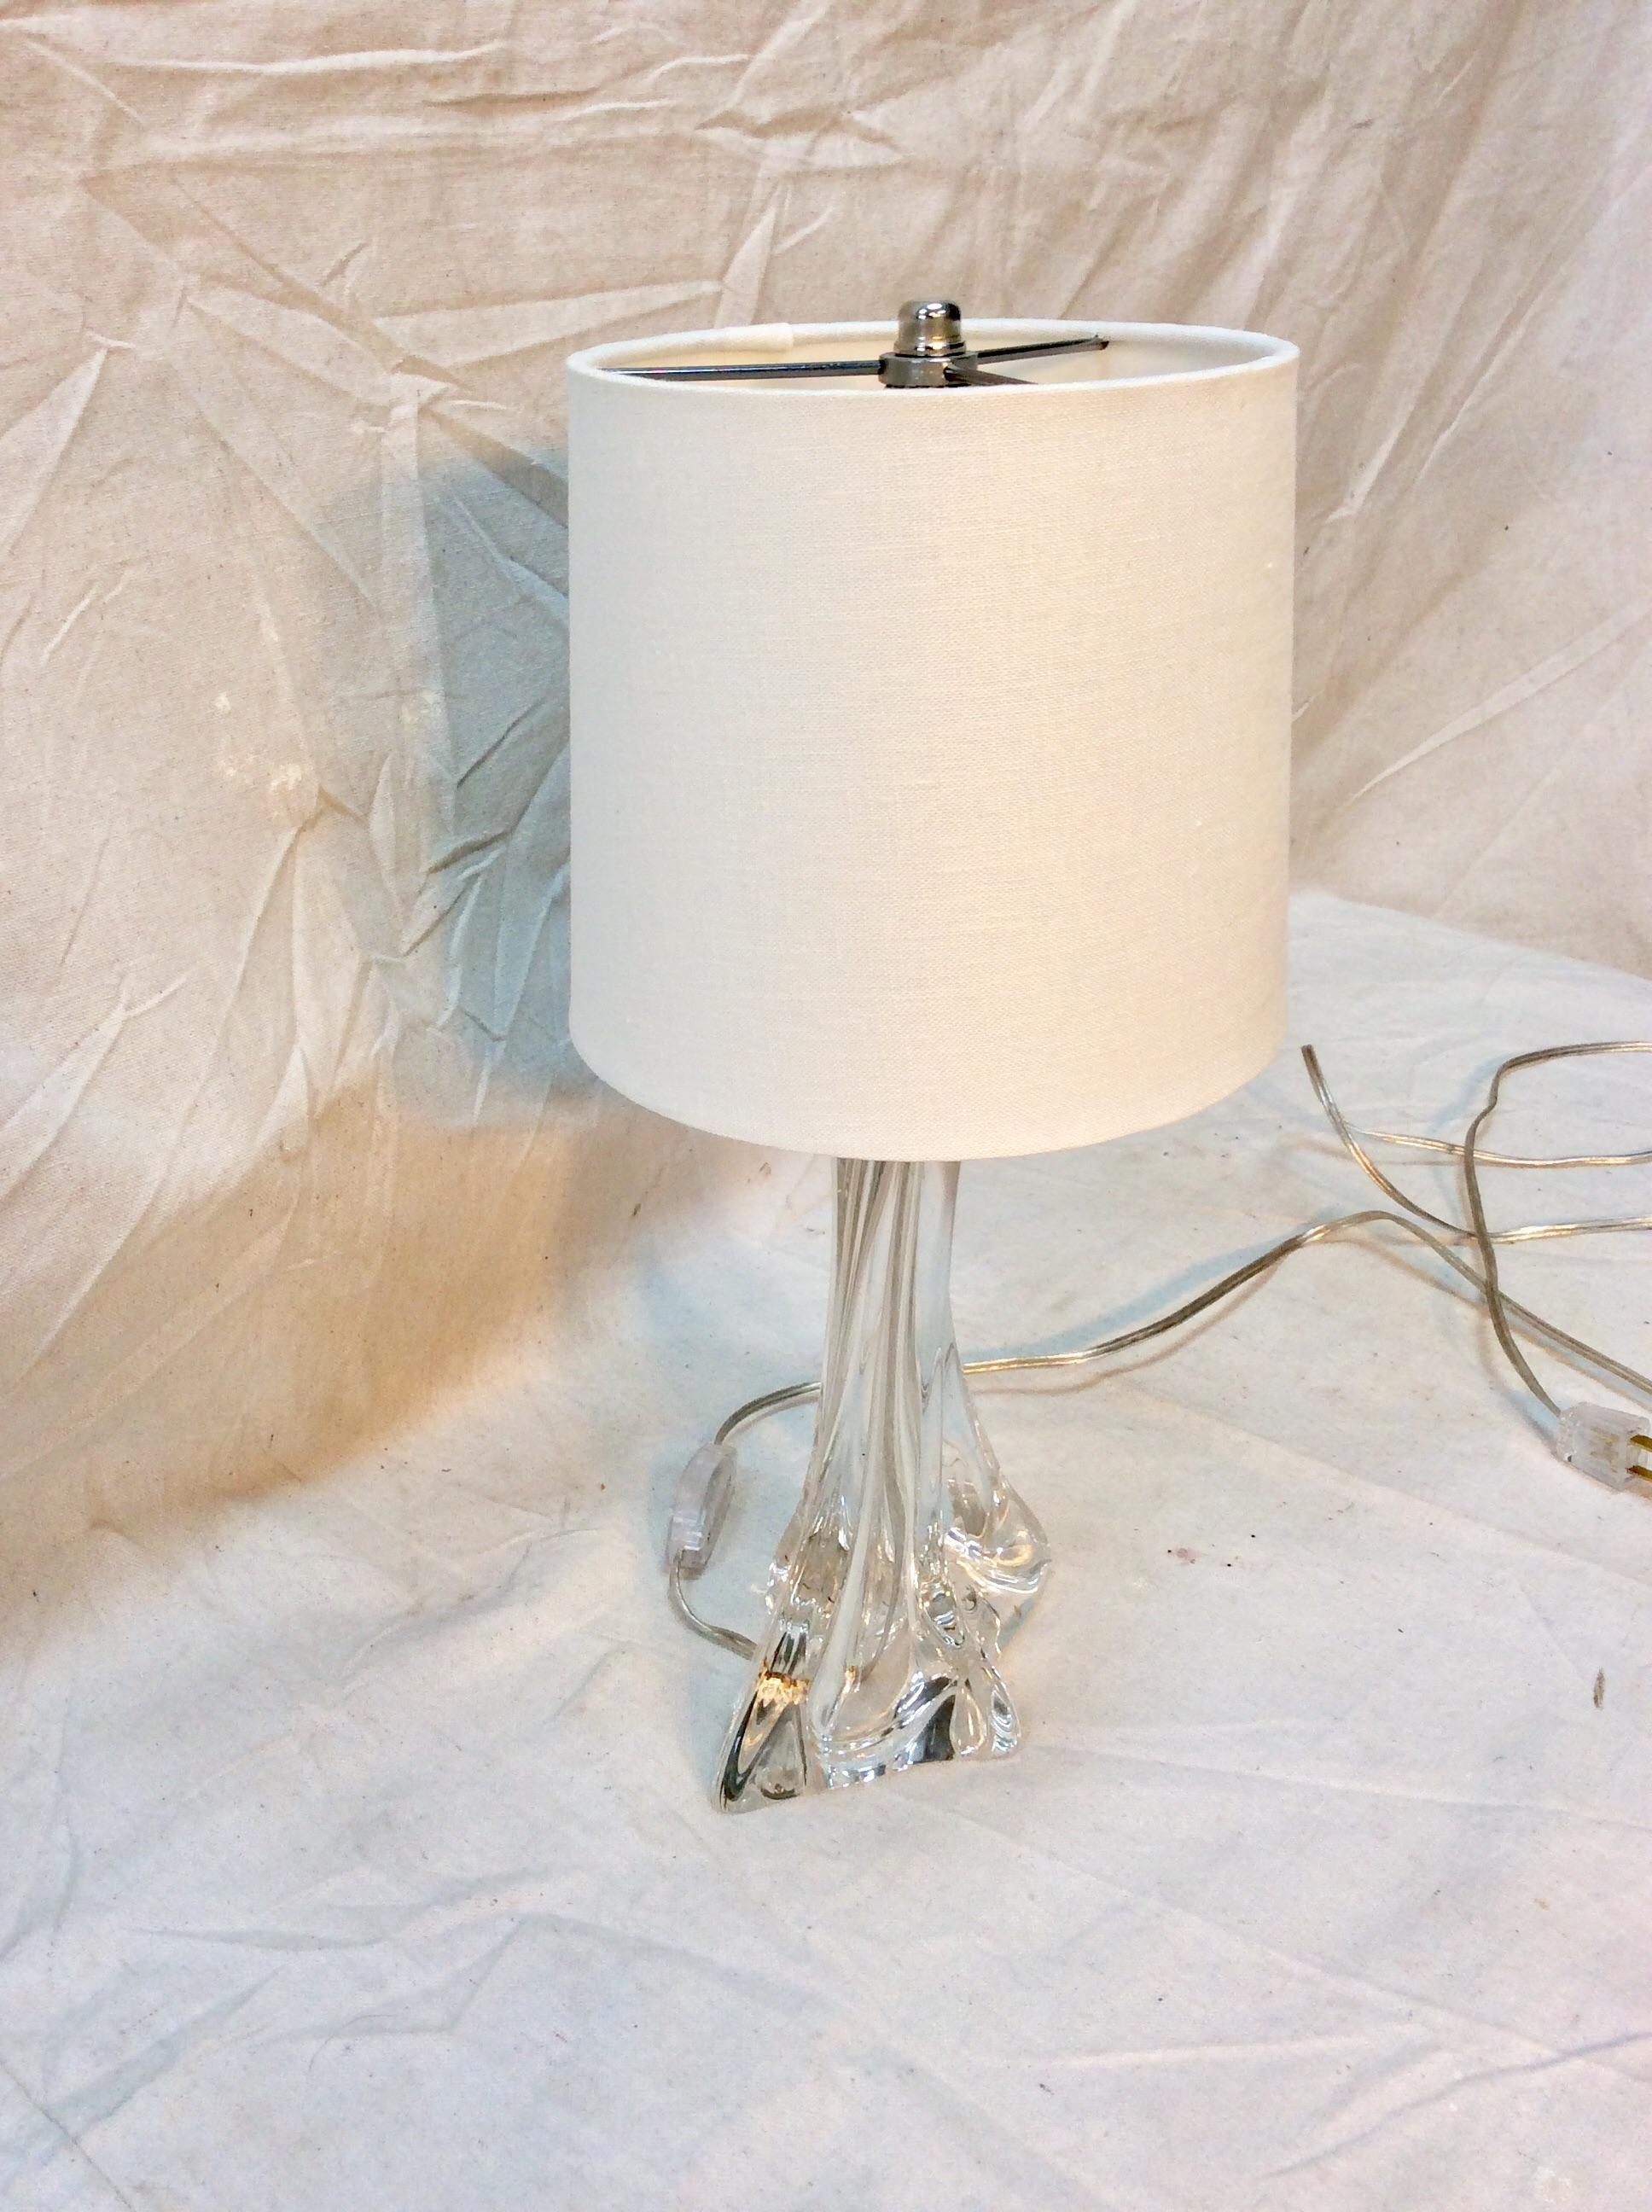 Found in the South of France, this Mid-20th century French Art Glass Table Lamp features hand blown organic formed crystal that sparkles in the light. This piece is newly wired to US standards with a chrome socket and an in line on and off